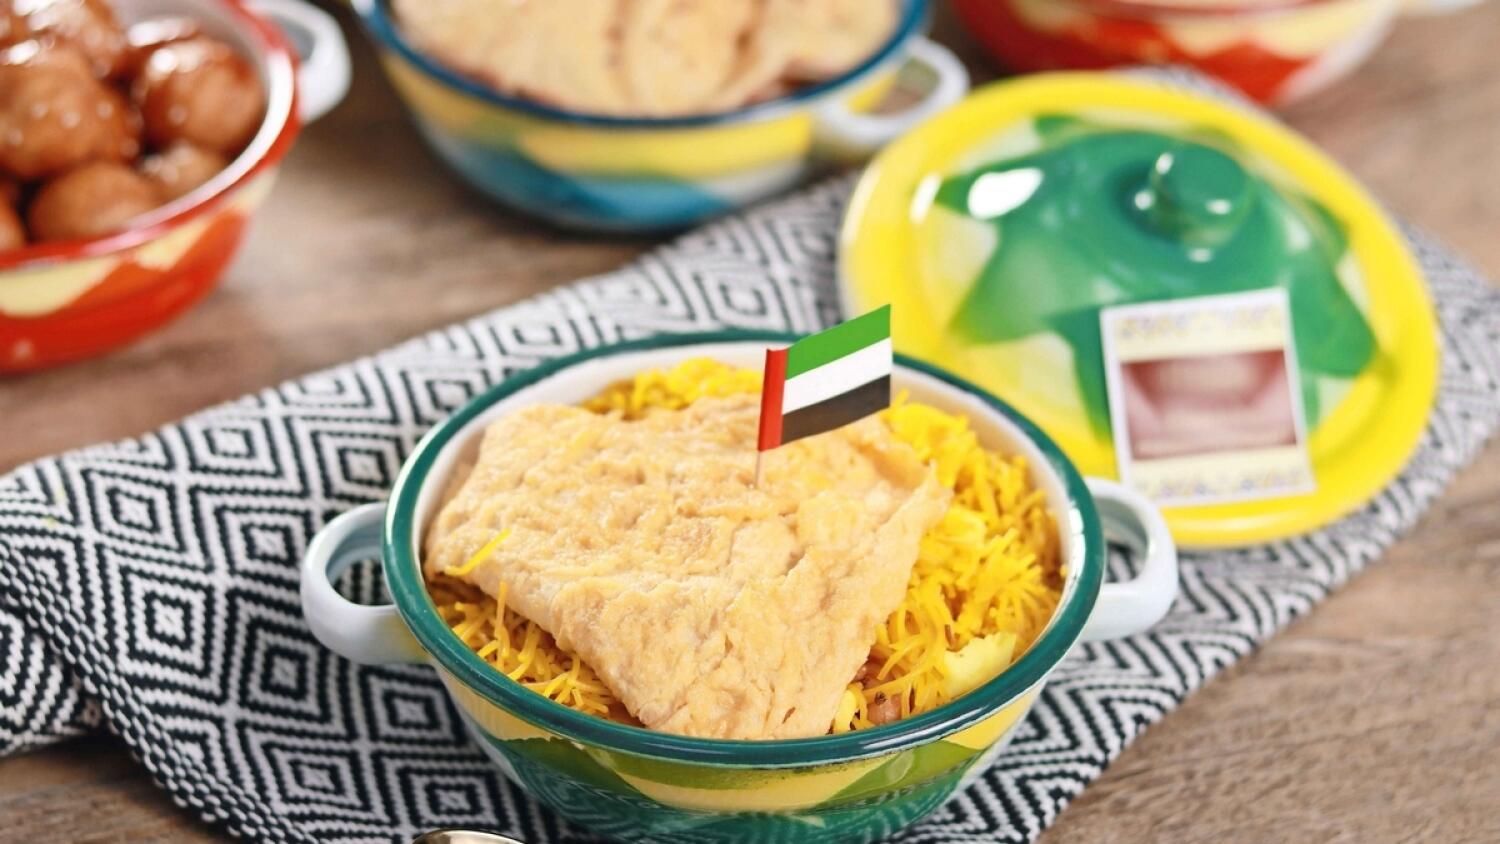 The Balaleet is a breakfast food and a dessert at the same time.
It is an inevitable part of the Iftars and Eid celebration for Emiratis.